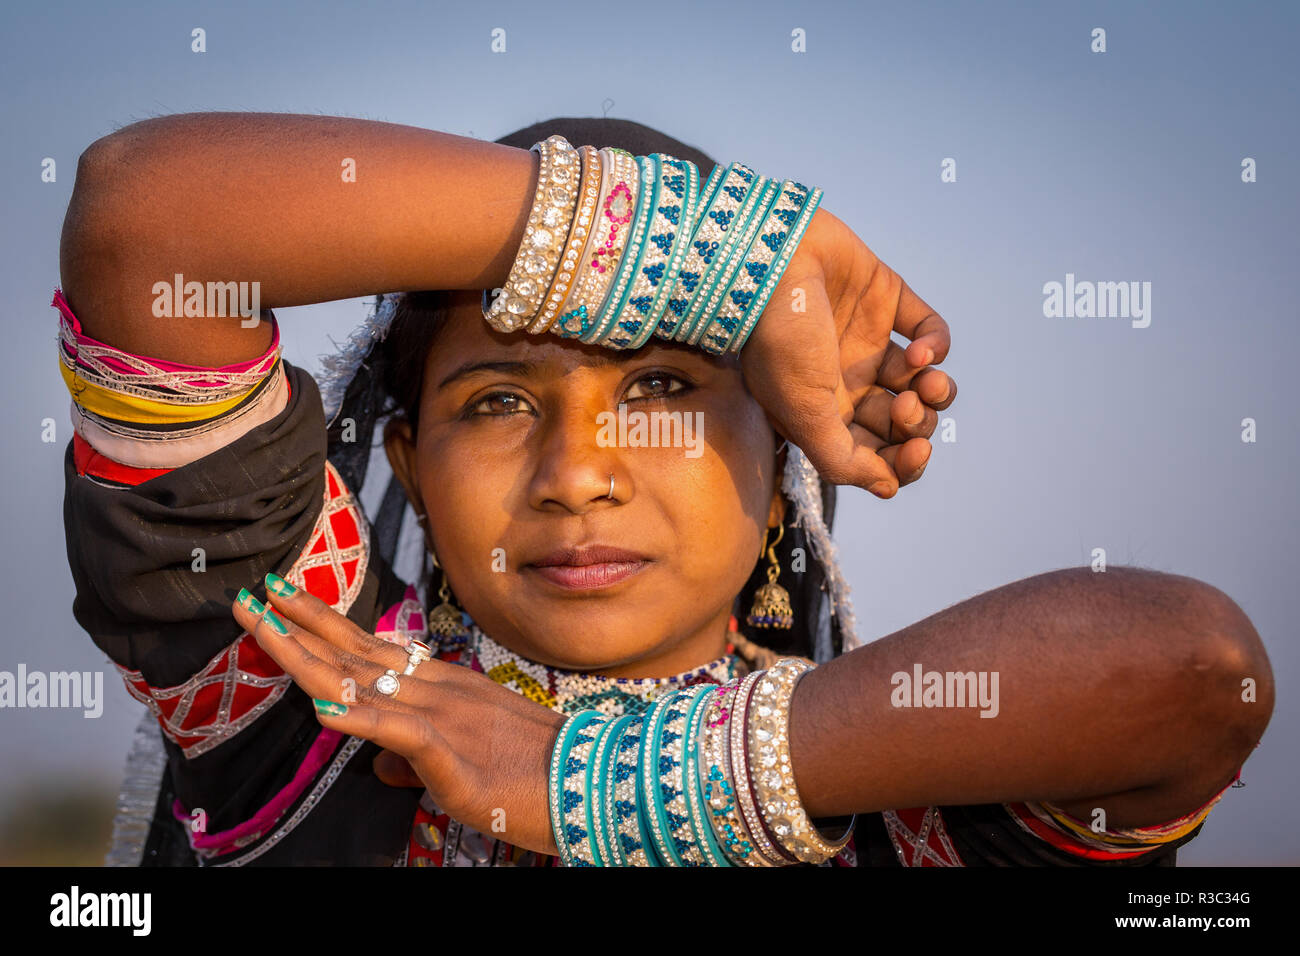 Portrait of younger Indian woman, Pushkar, Rajasthan, India Stock Photo